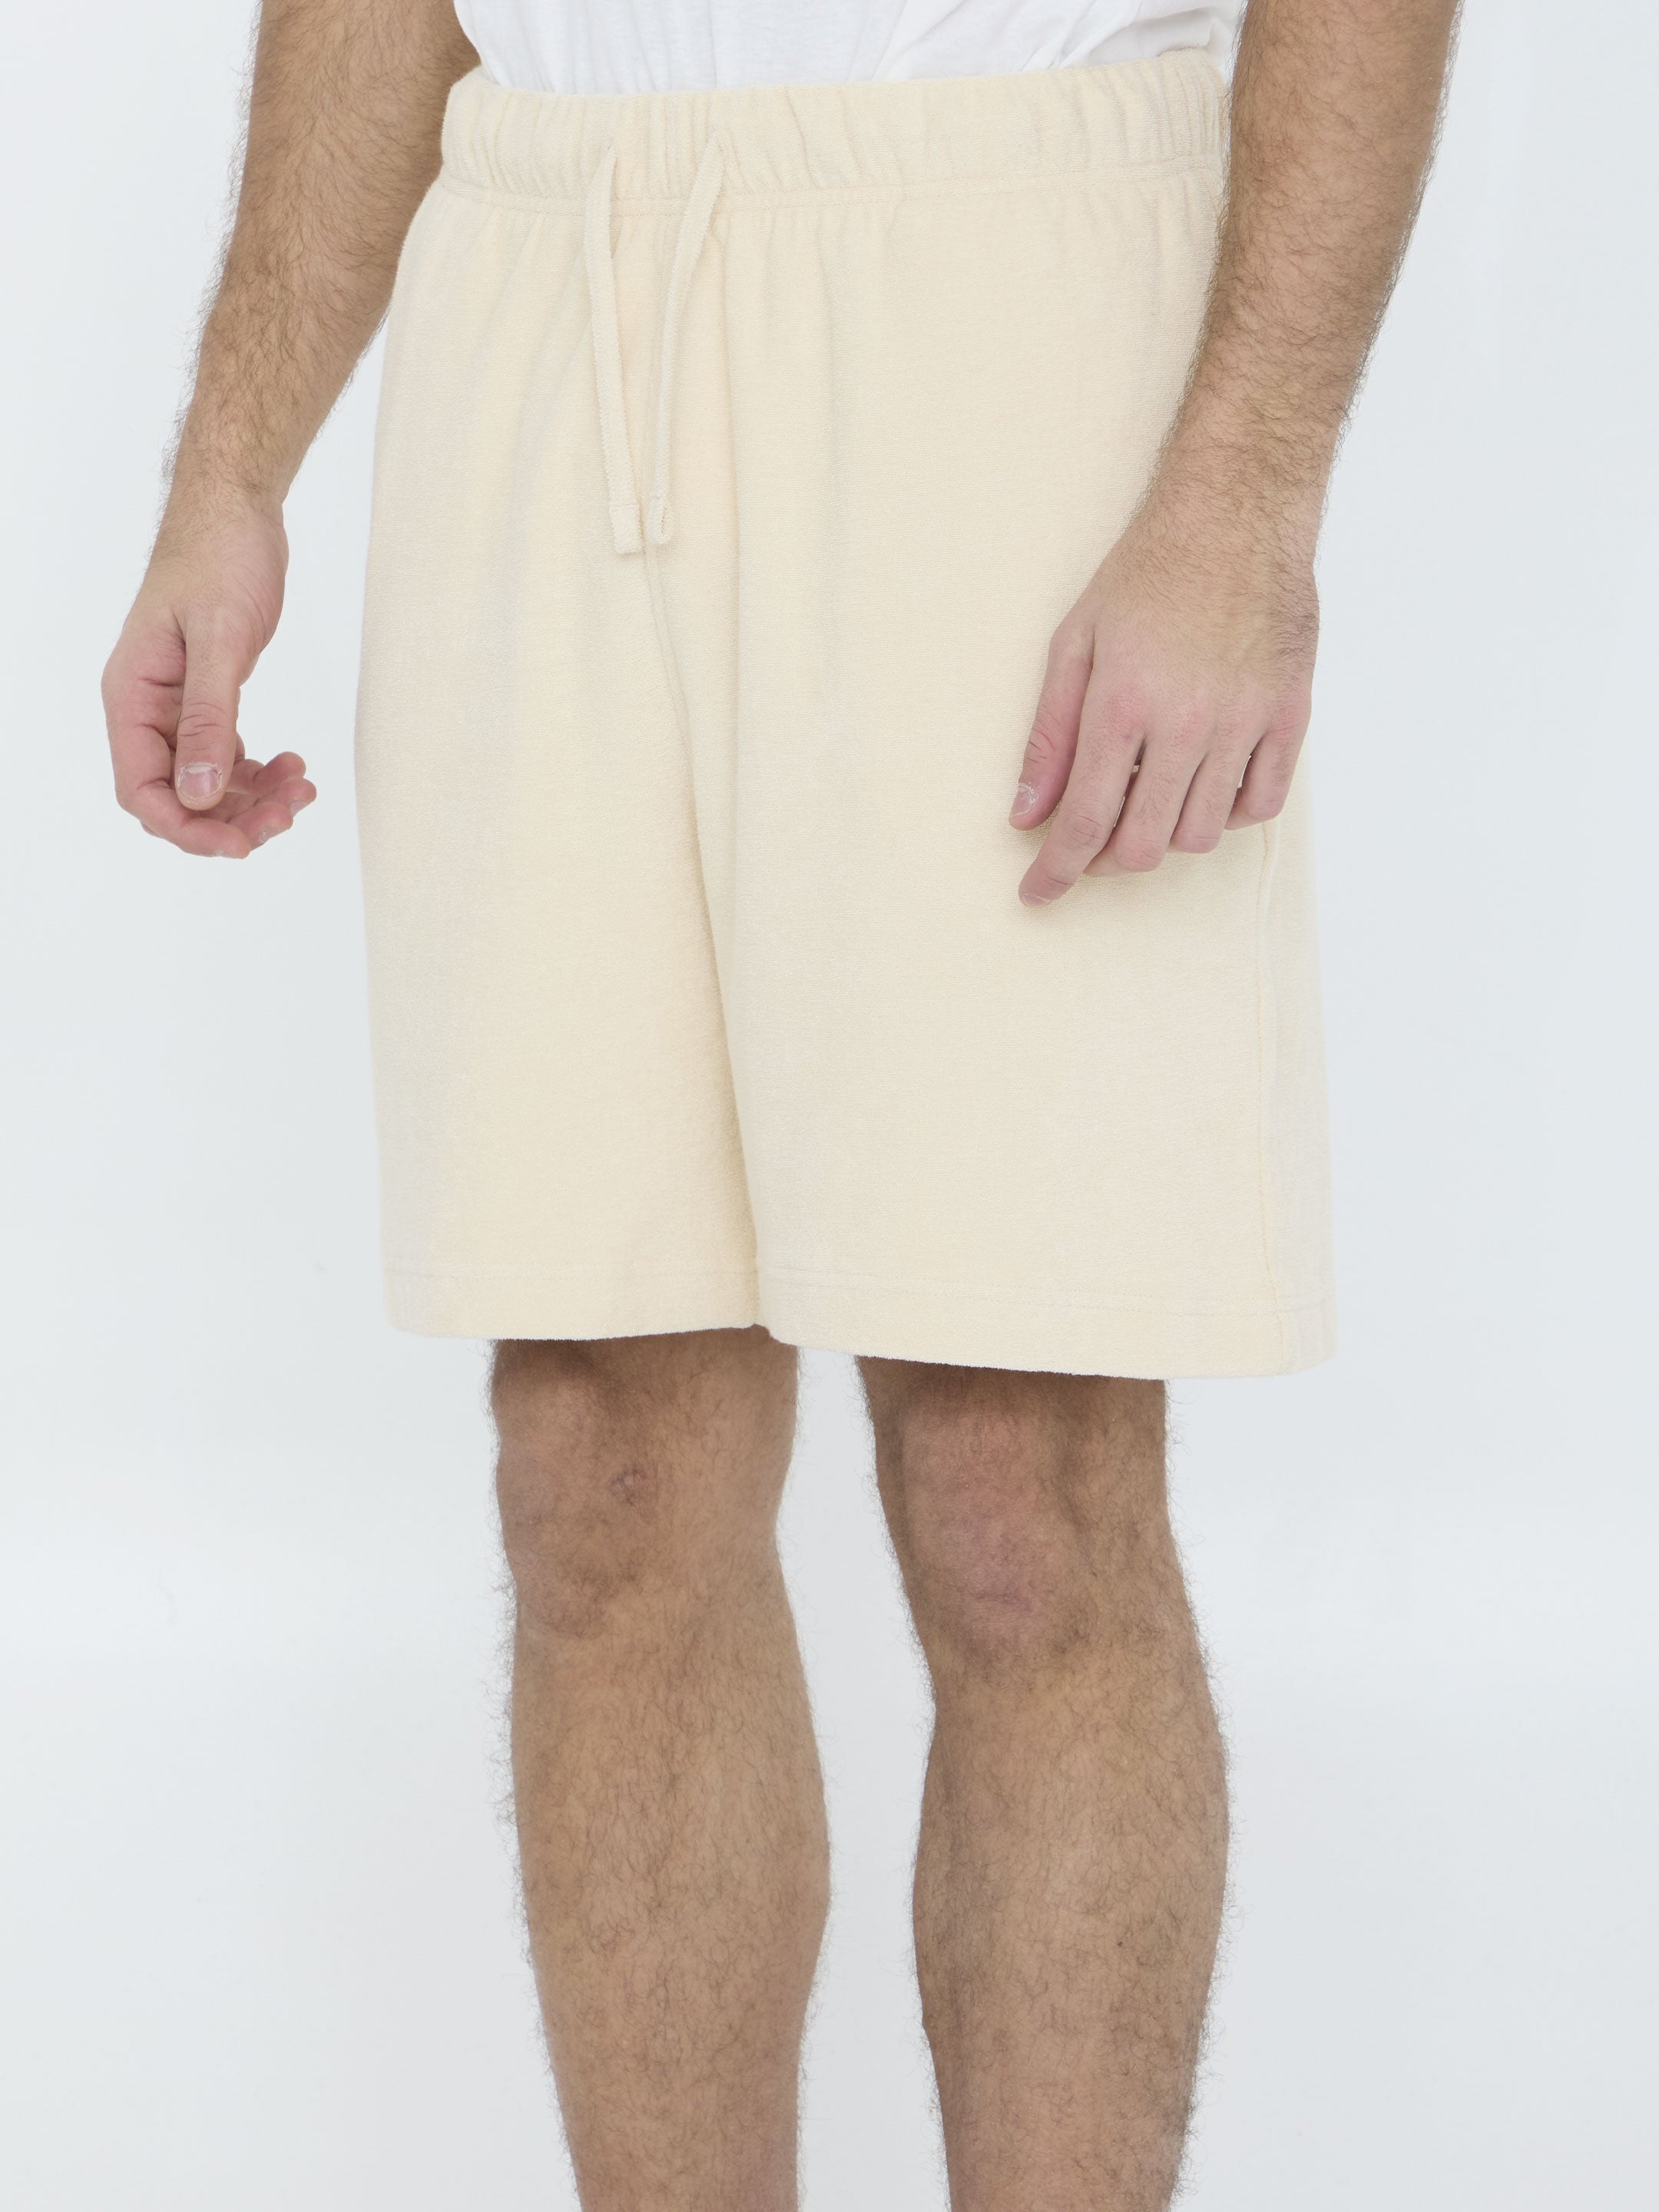 Cotton towelling shorts